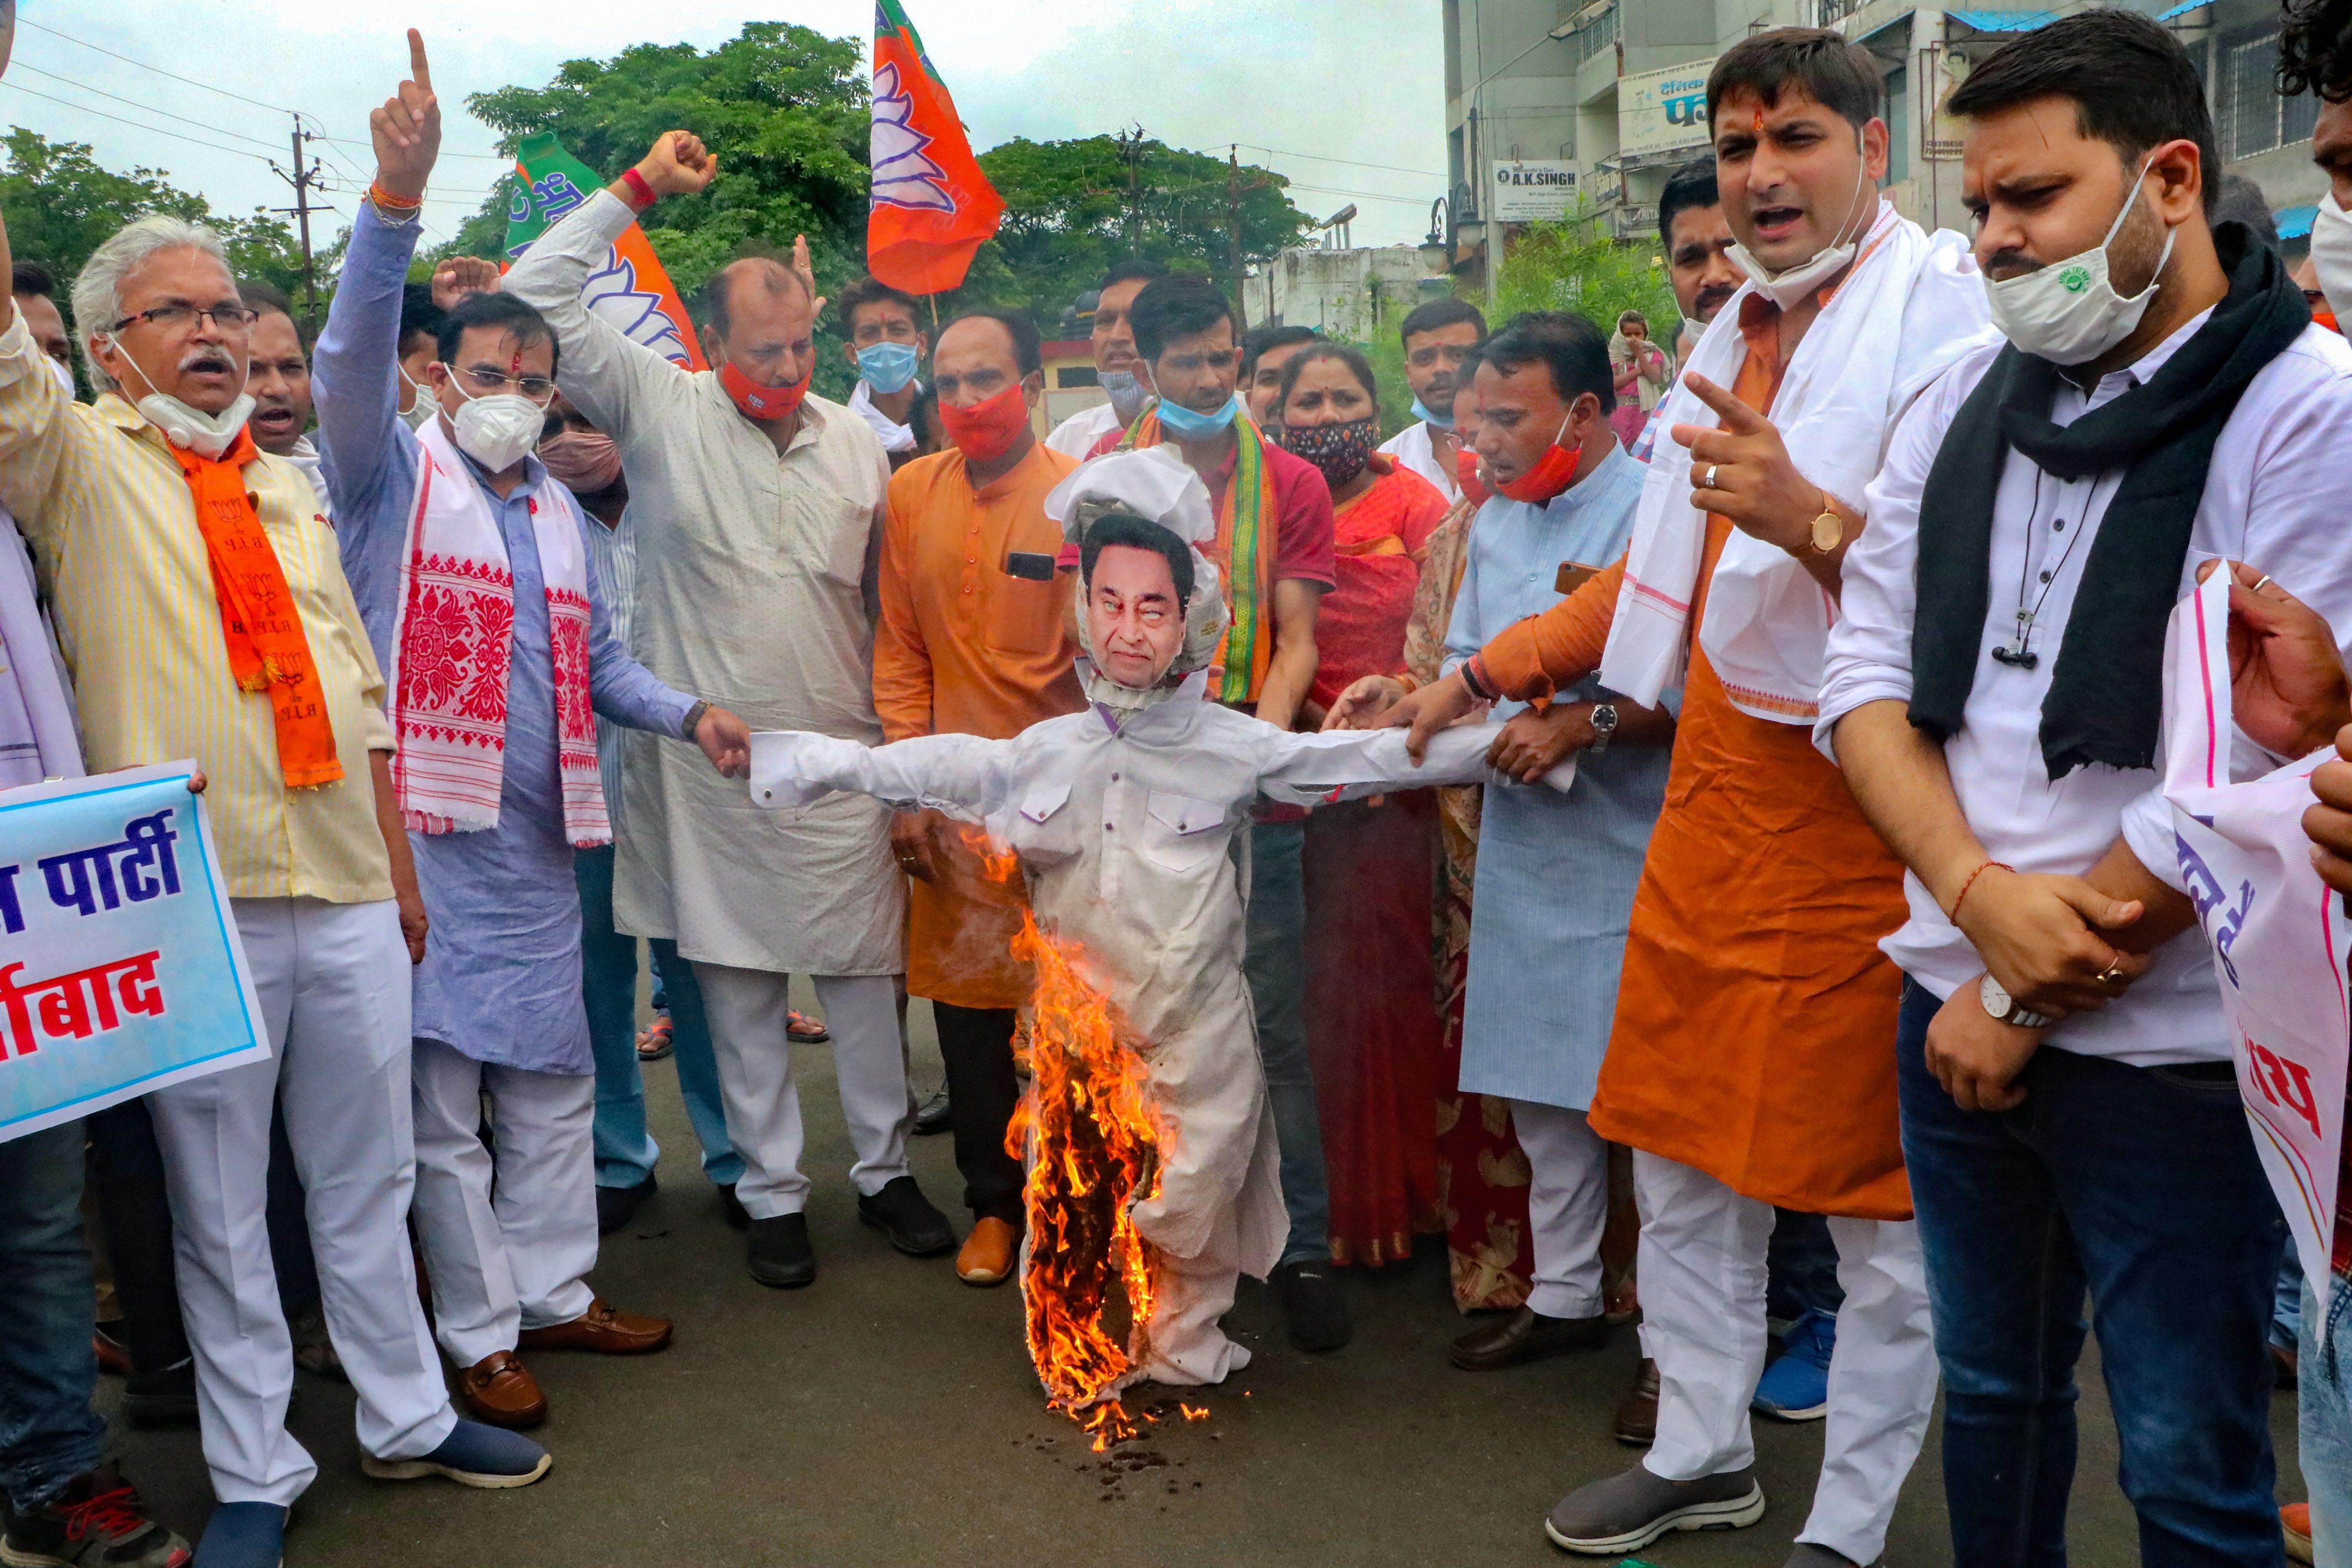 BJP State President VD Sharma along with party workers burn an effigy of the former chief minister and Congress leader Kamal Nath. Credits: PTI Photo